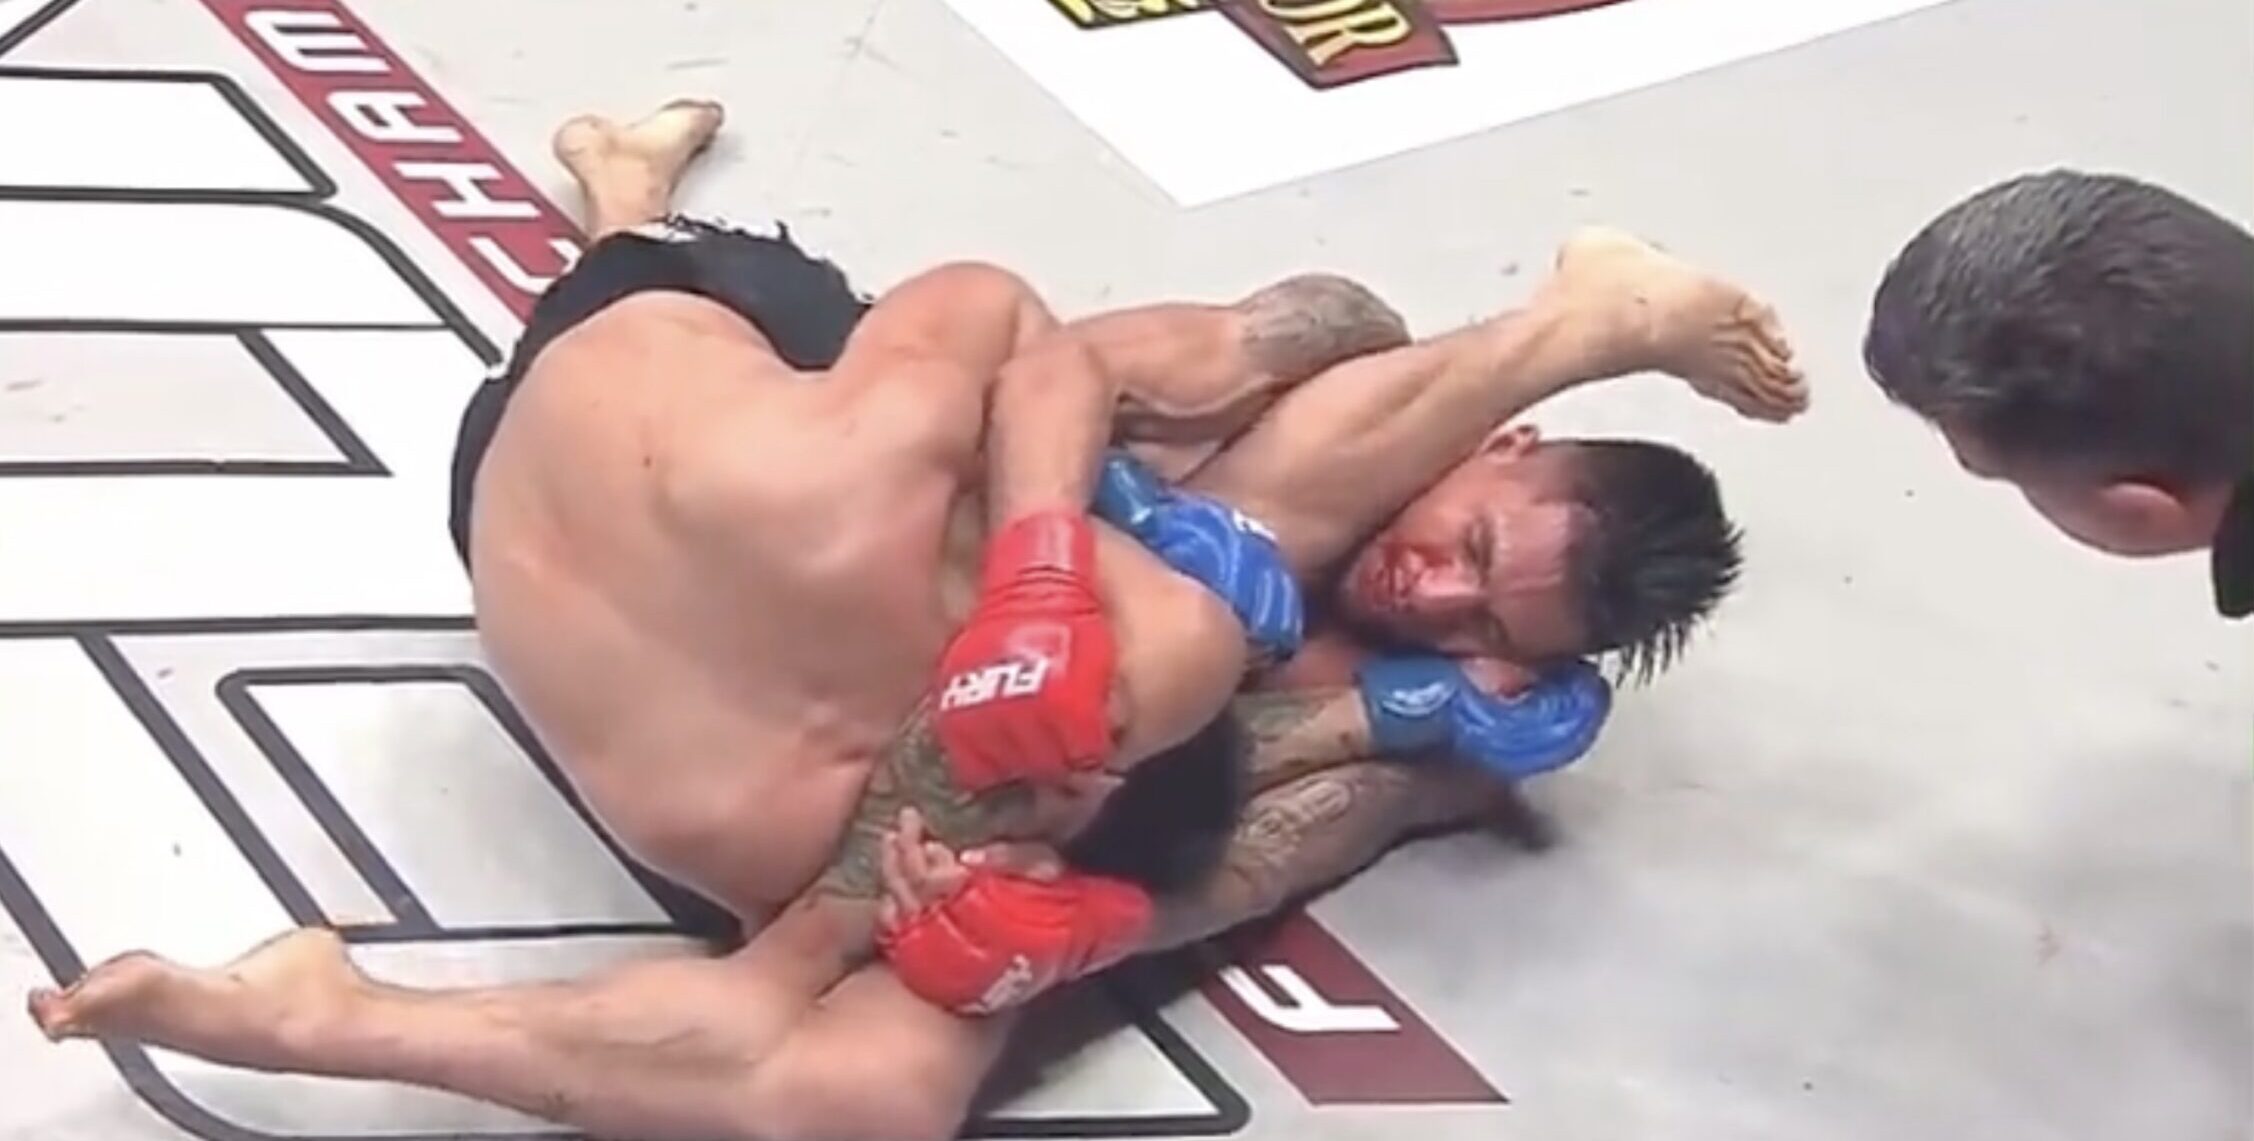 ‘WHAT IS HE DOING?!’ MMA Announcers Beg the Referee to Stop Fight for 38 Excruciating Seconds Before He Finally Does